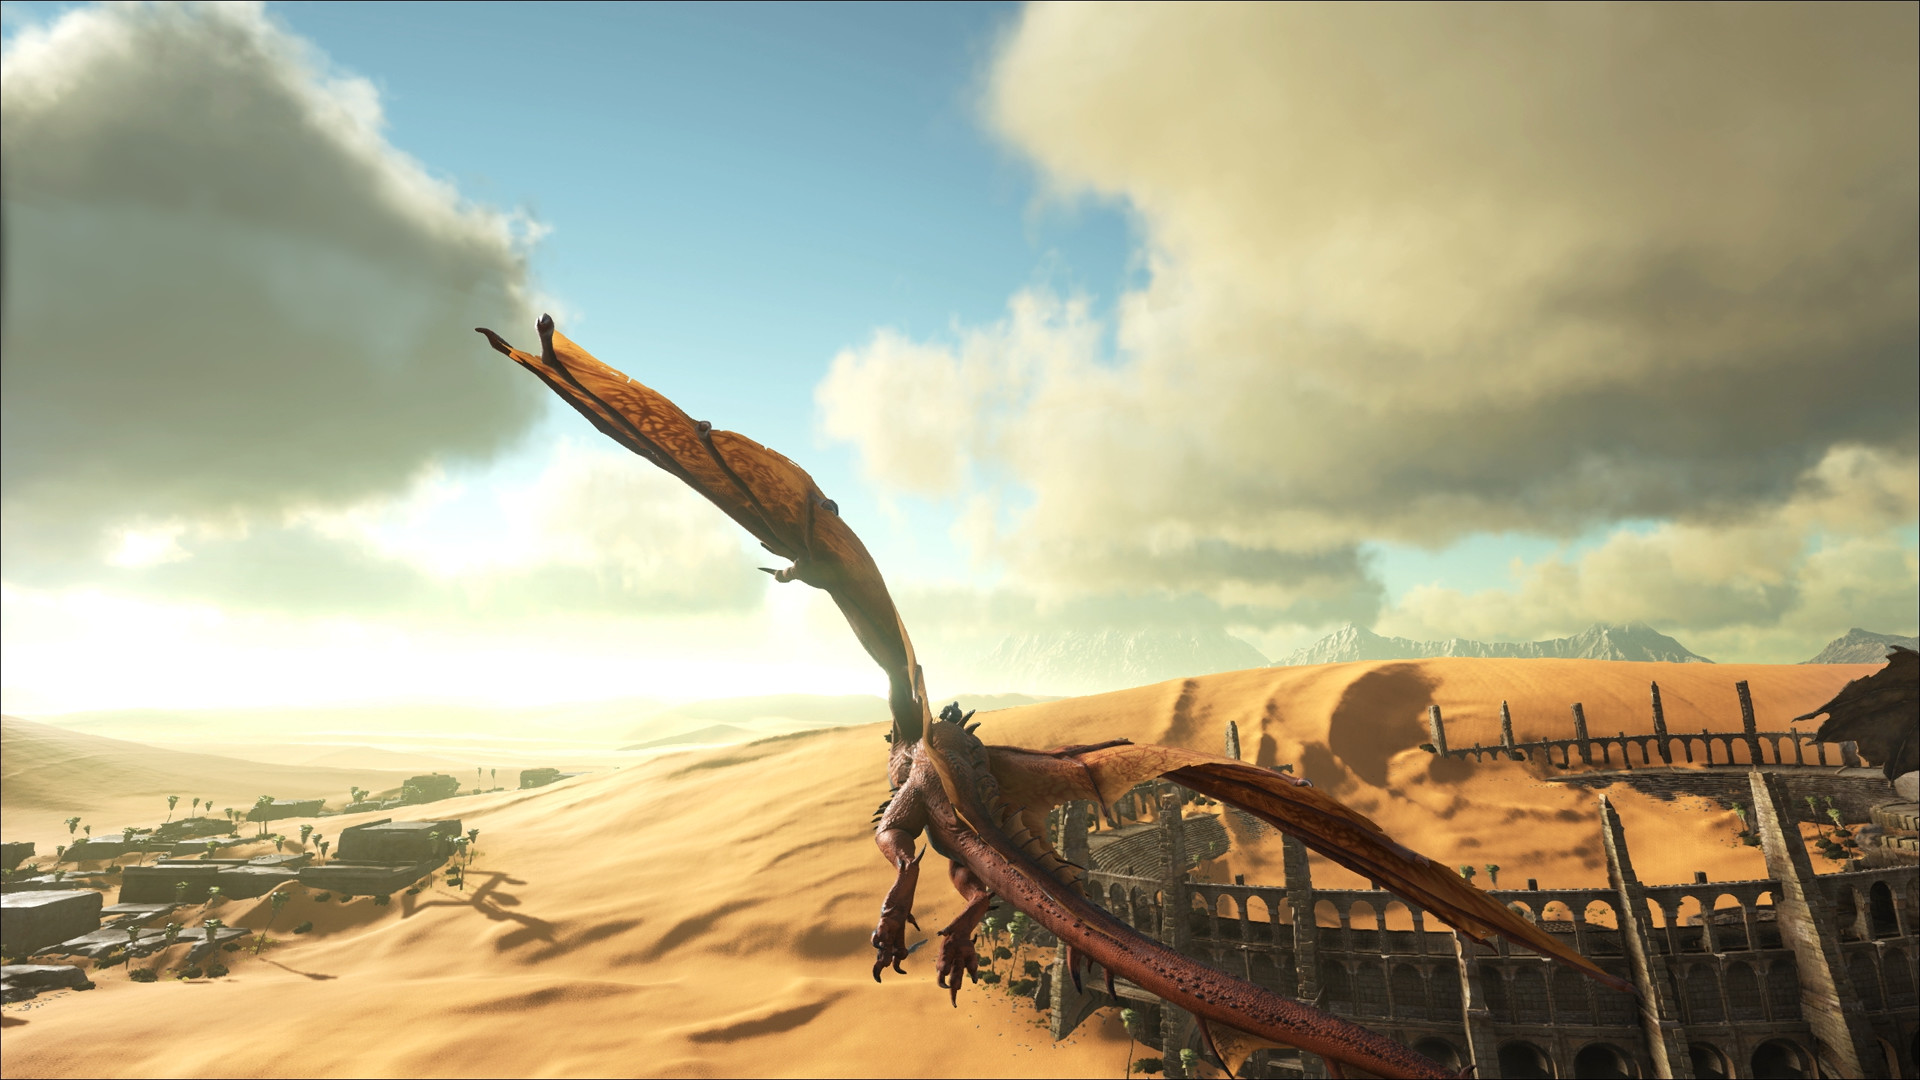 download ark scorched earth for free